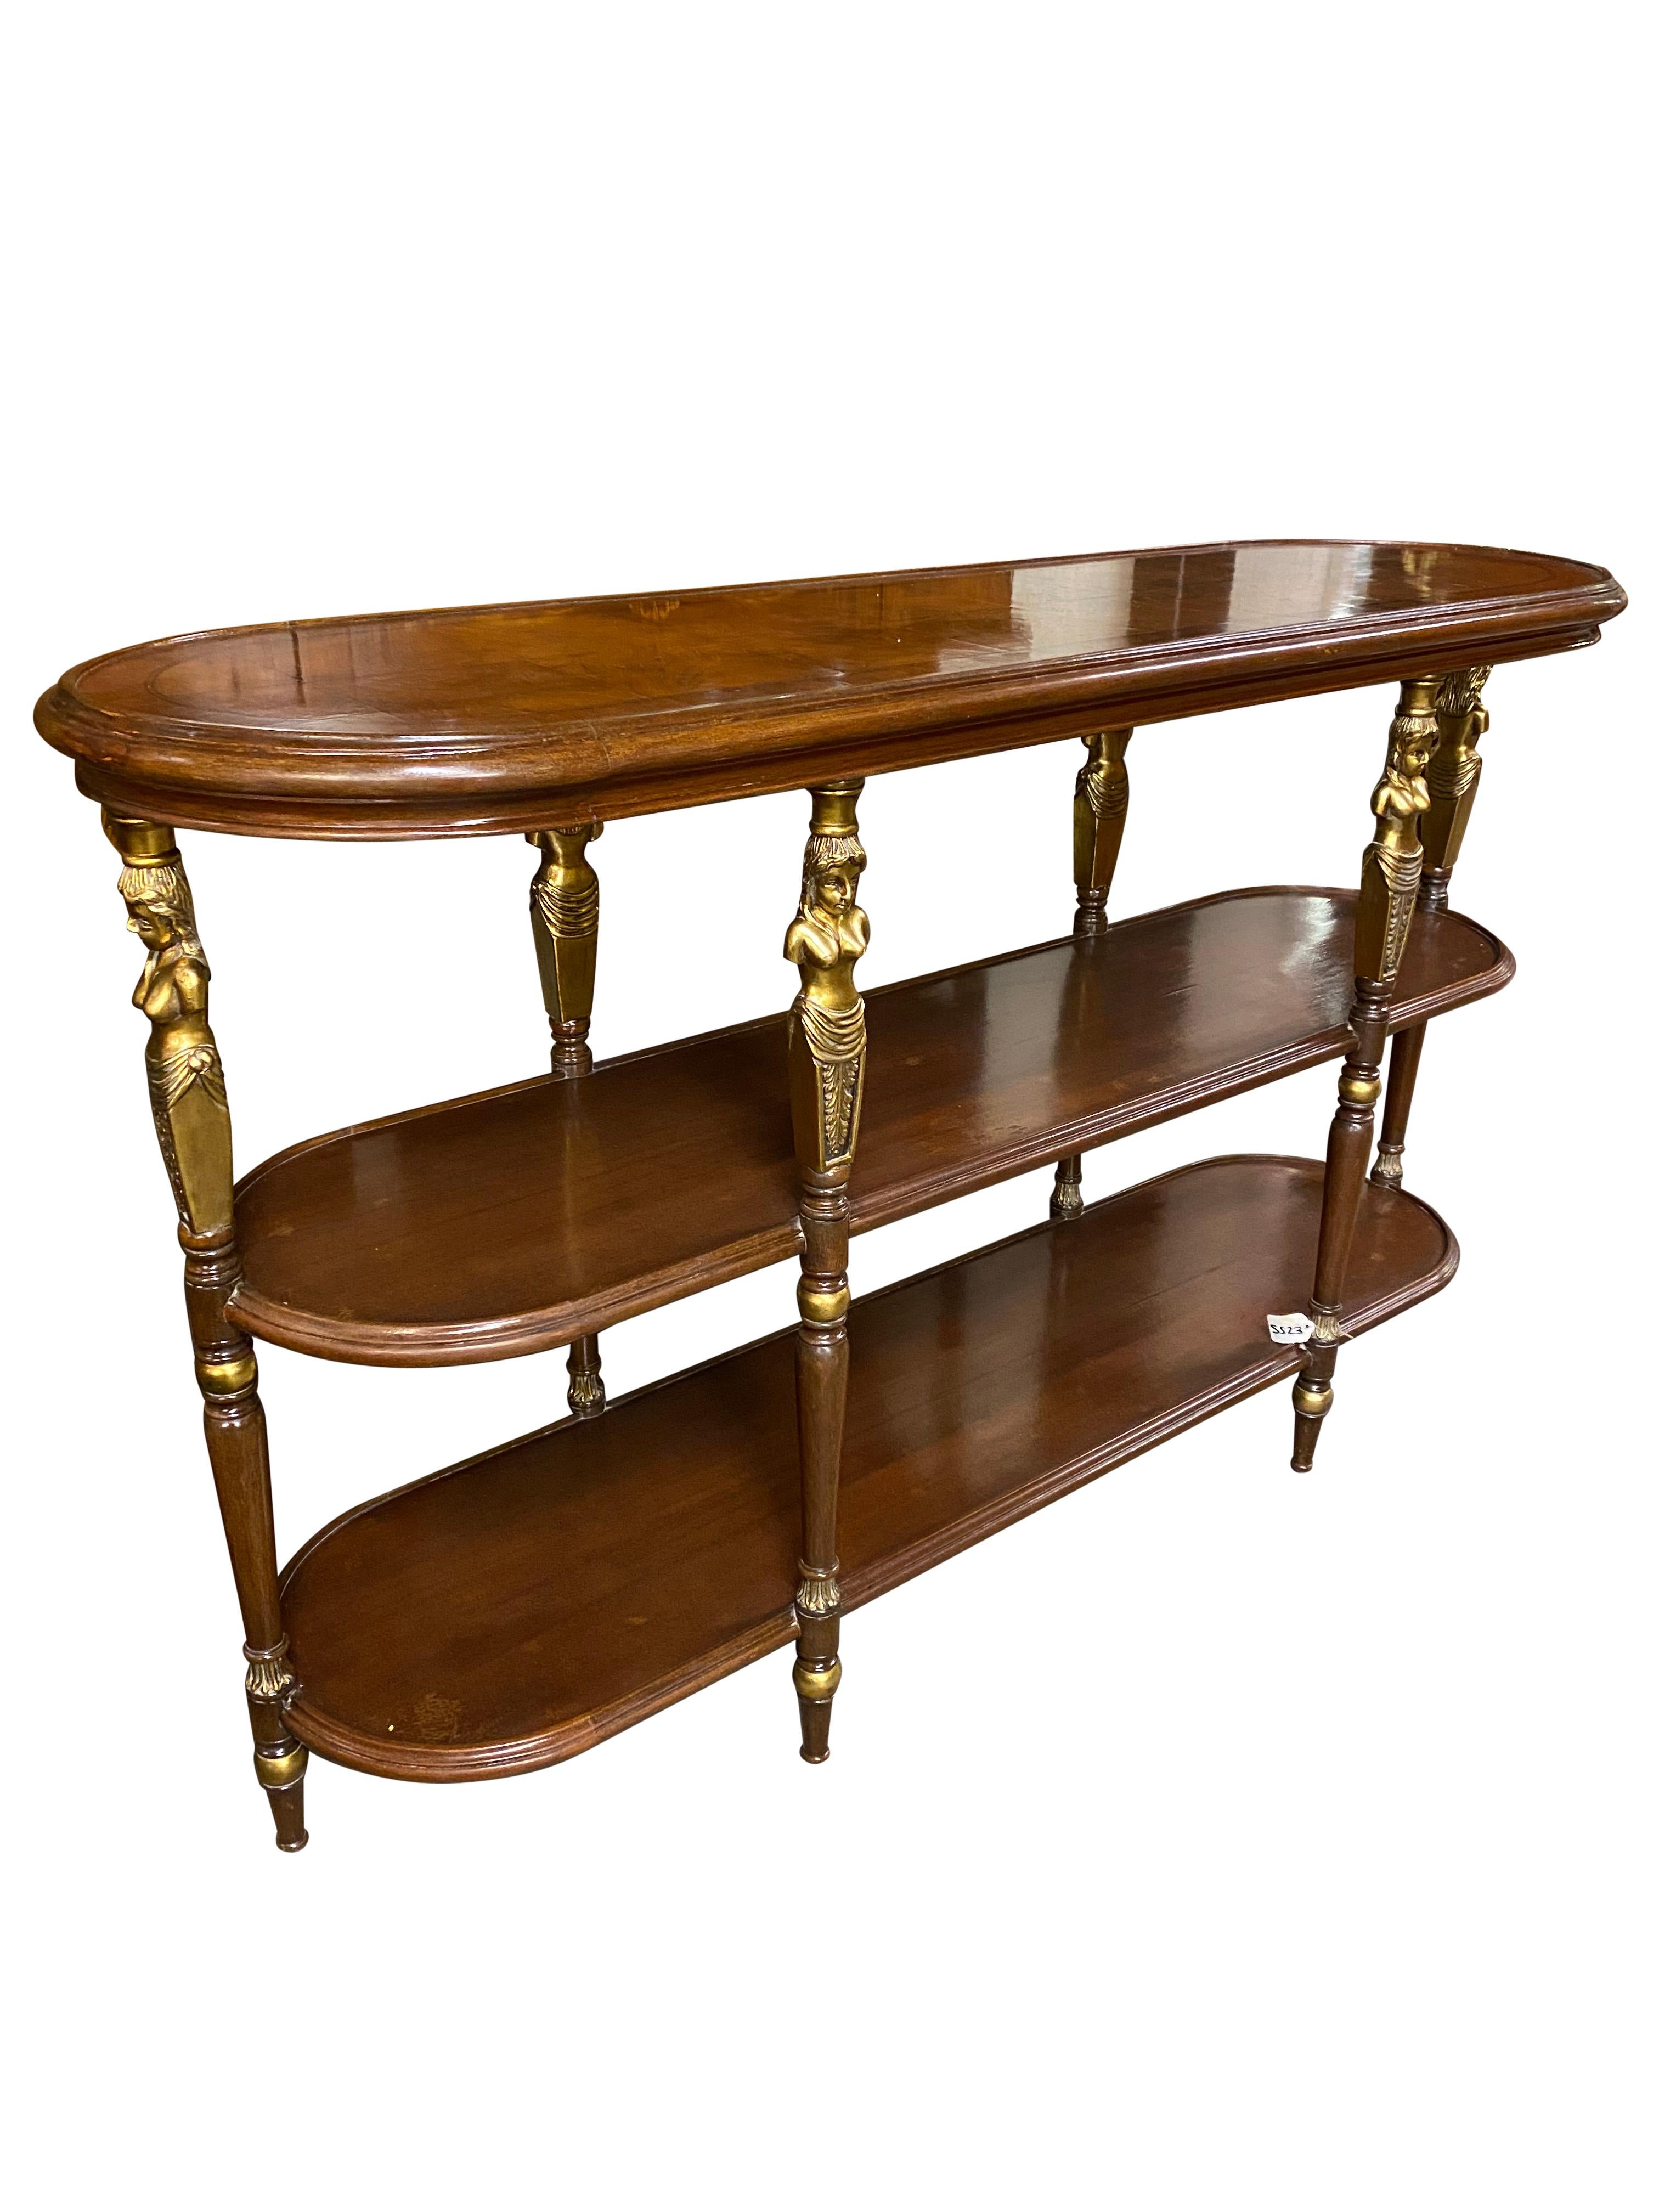 20th Century French Empire Style Open Bookcase/Etagere Tiered Table For Sale 12